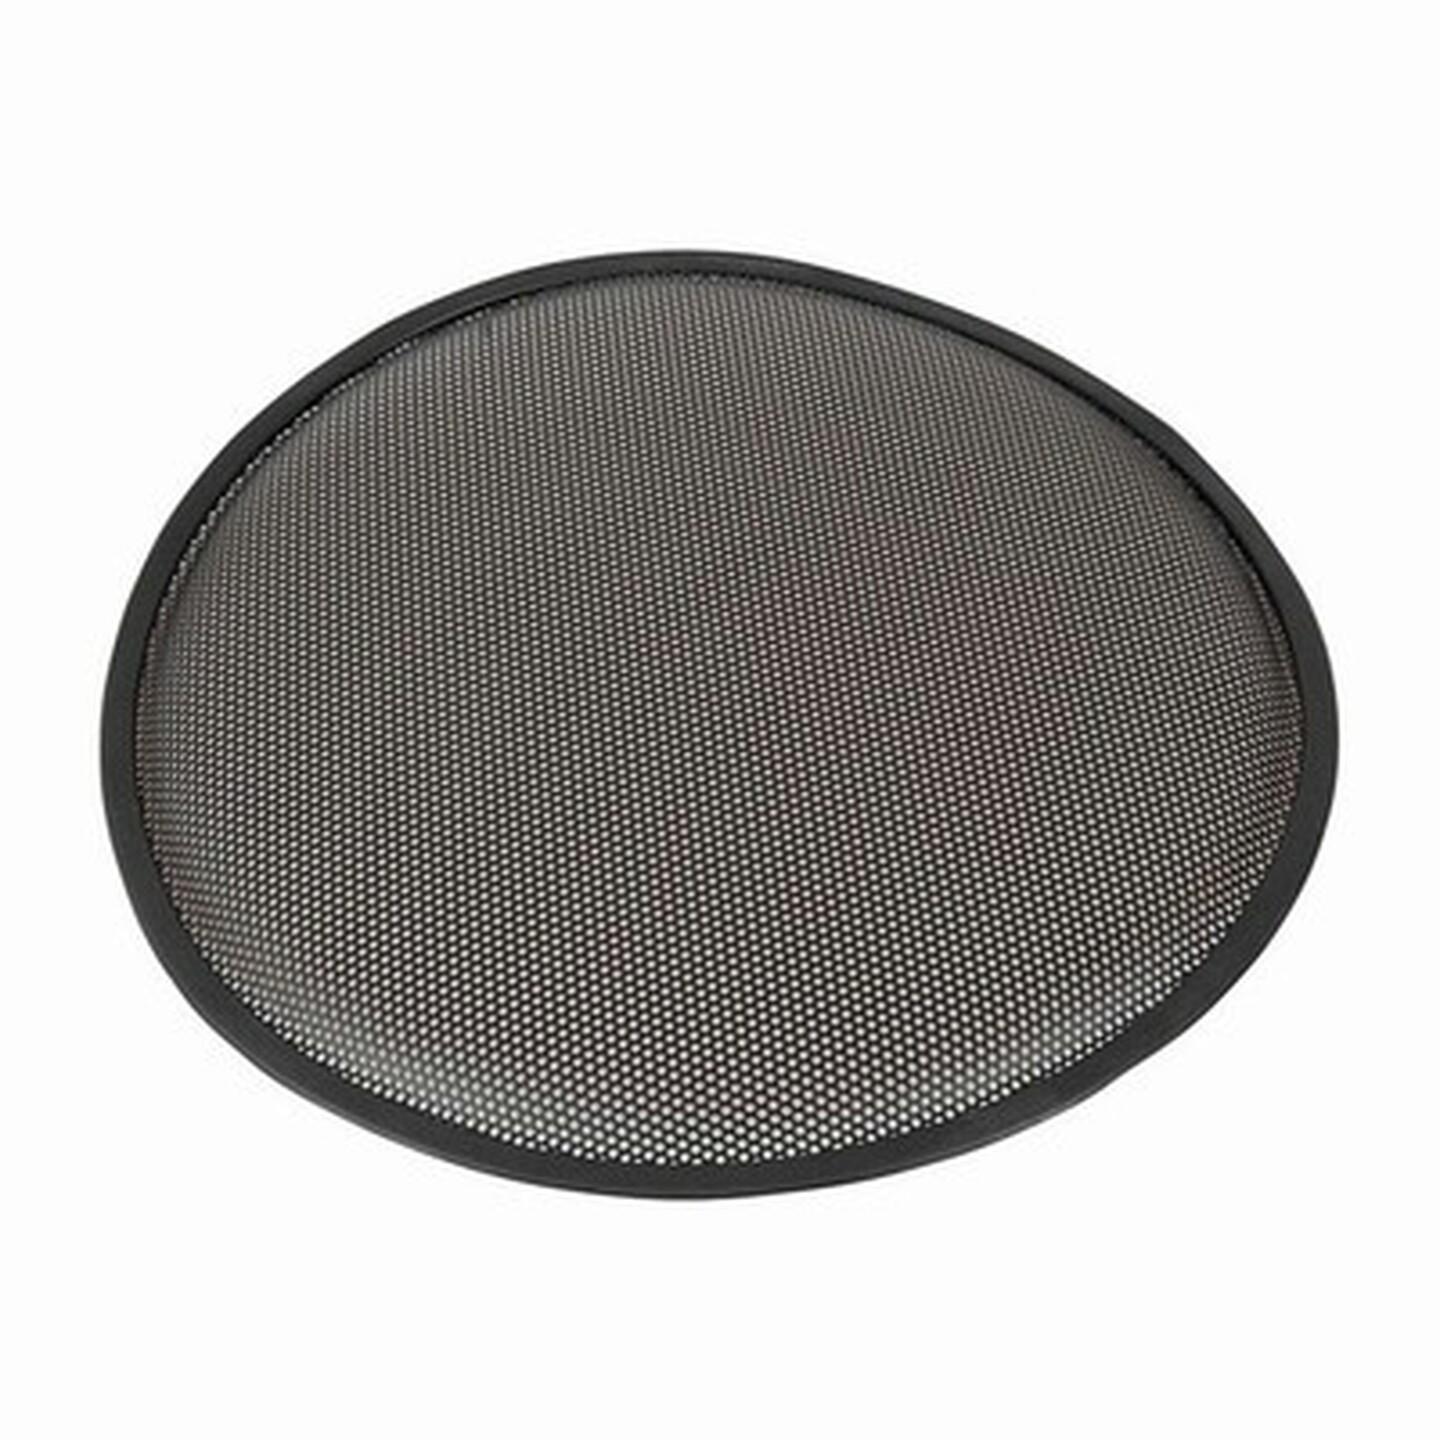 15 Speaker Protection Grille with Clips